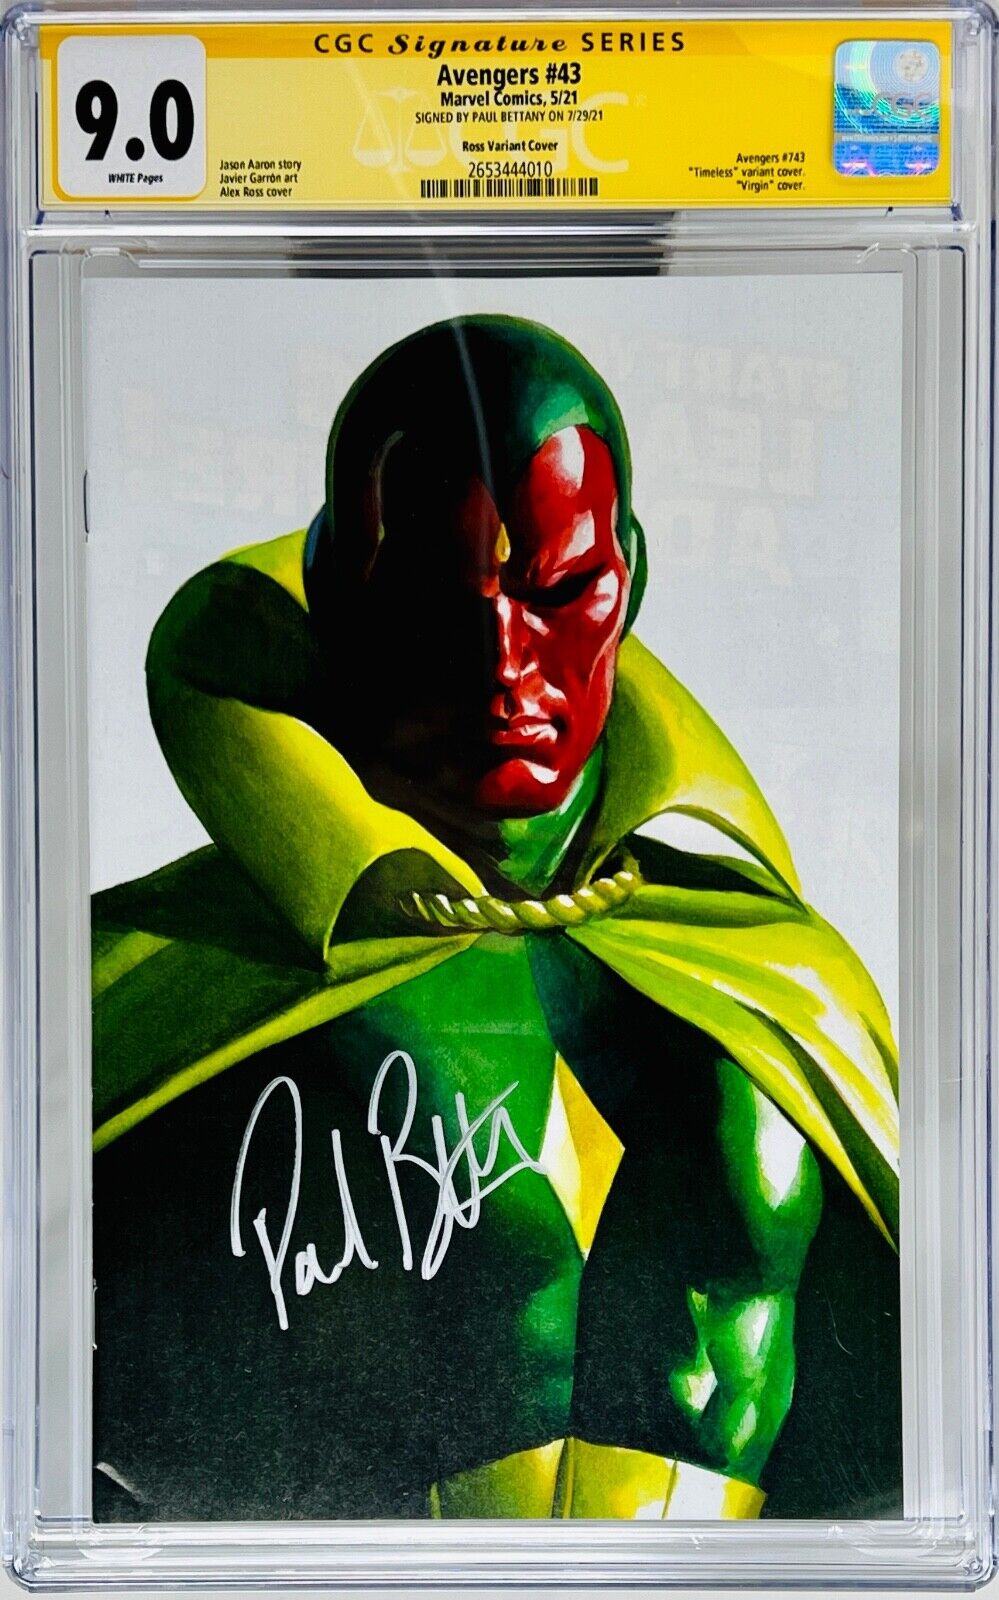 CGC Signature Series Graded 9.0 Marvel The Avengers #43 Signed by Paul Bettany